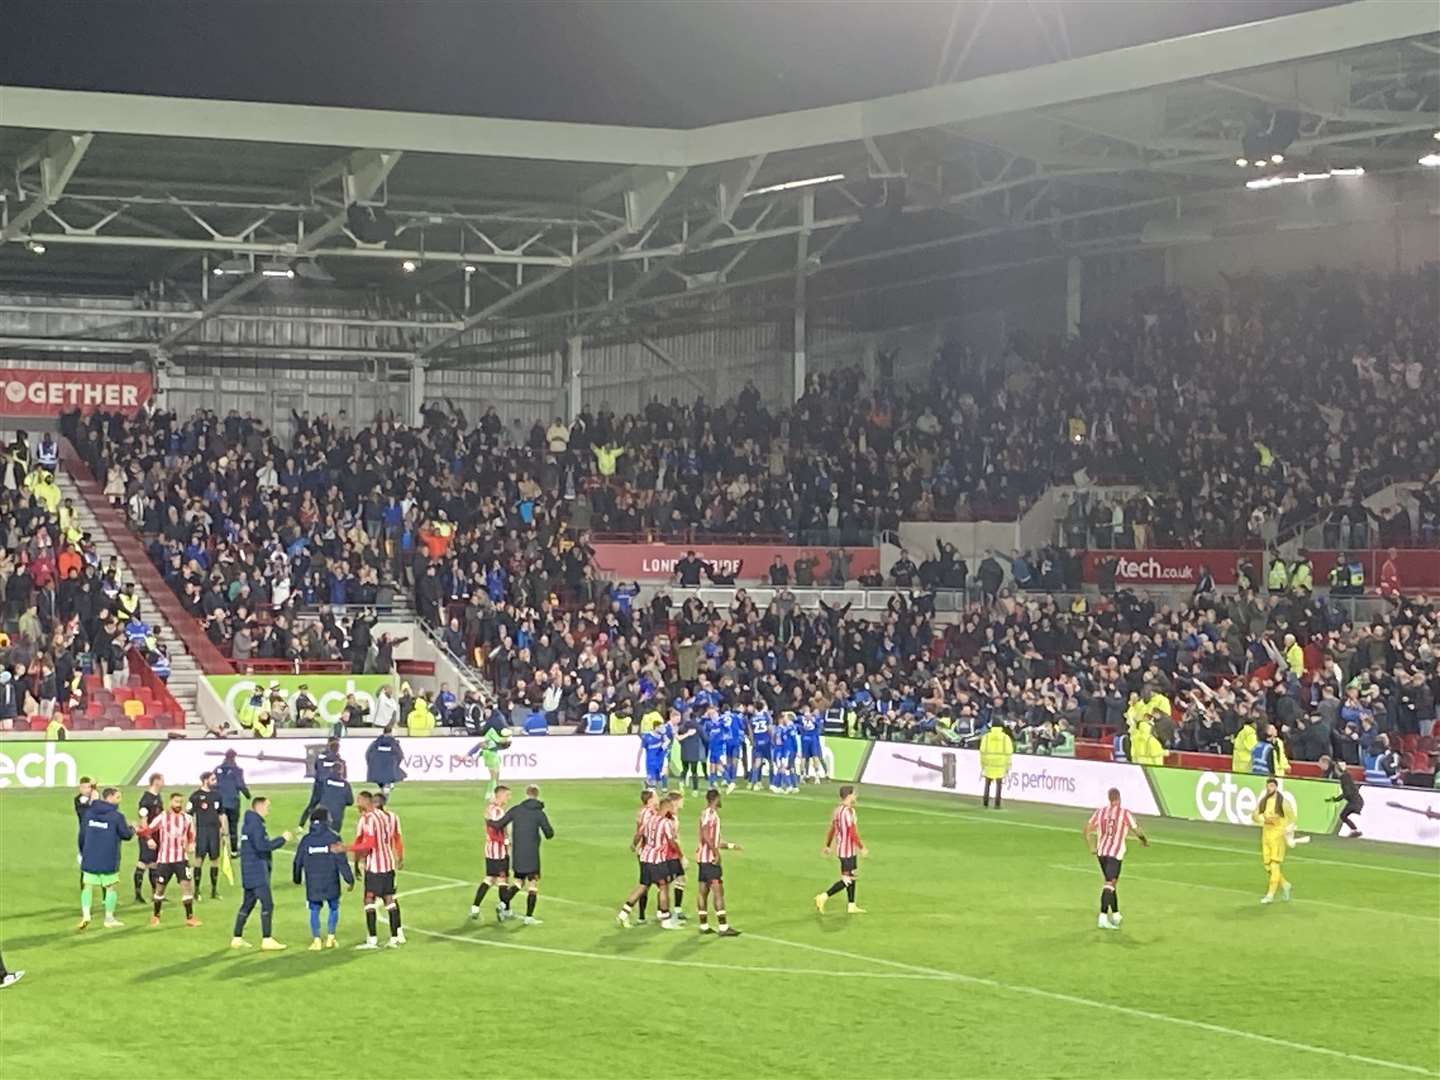 Gillingham celebrate their win infront of around 2,000 fans at Brentford (60523026)